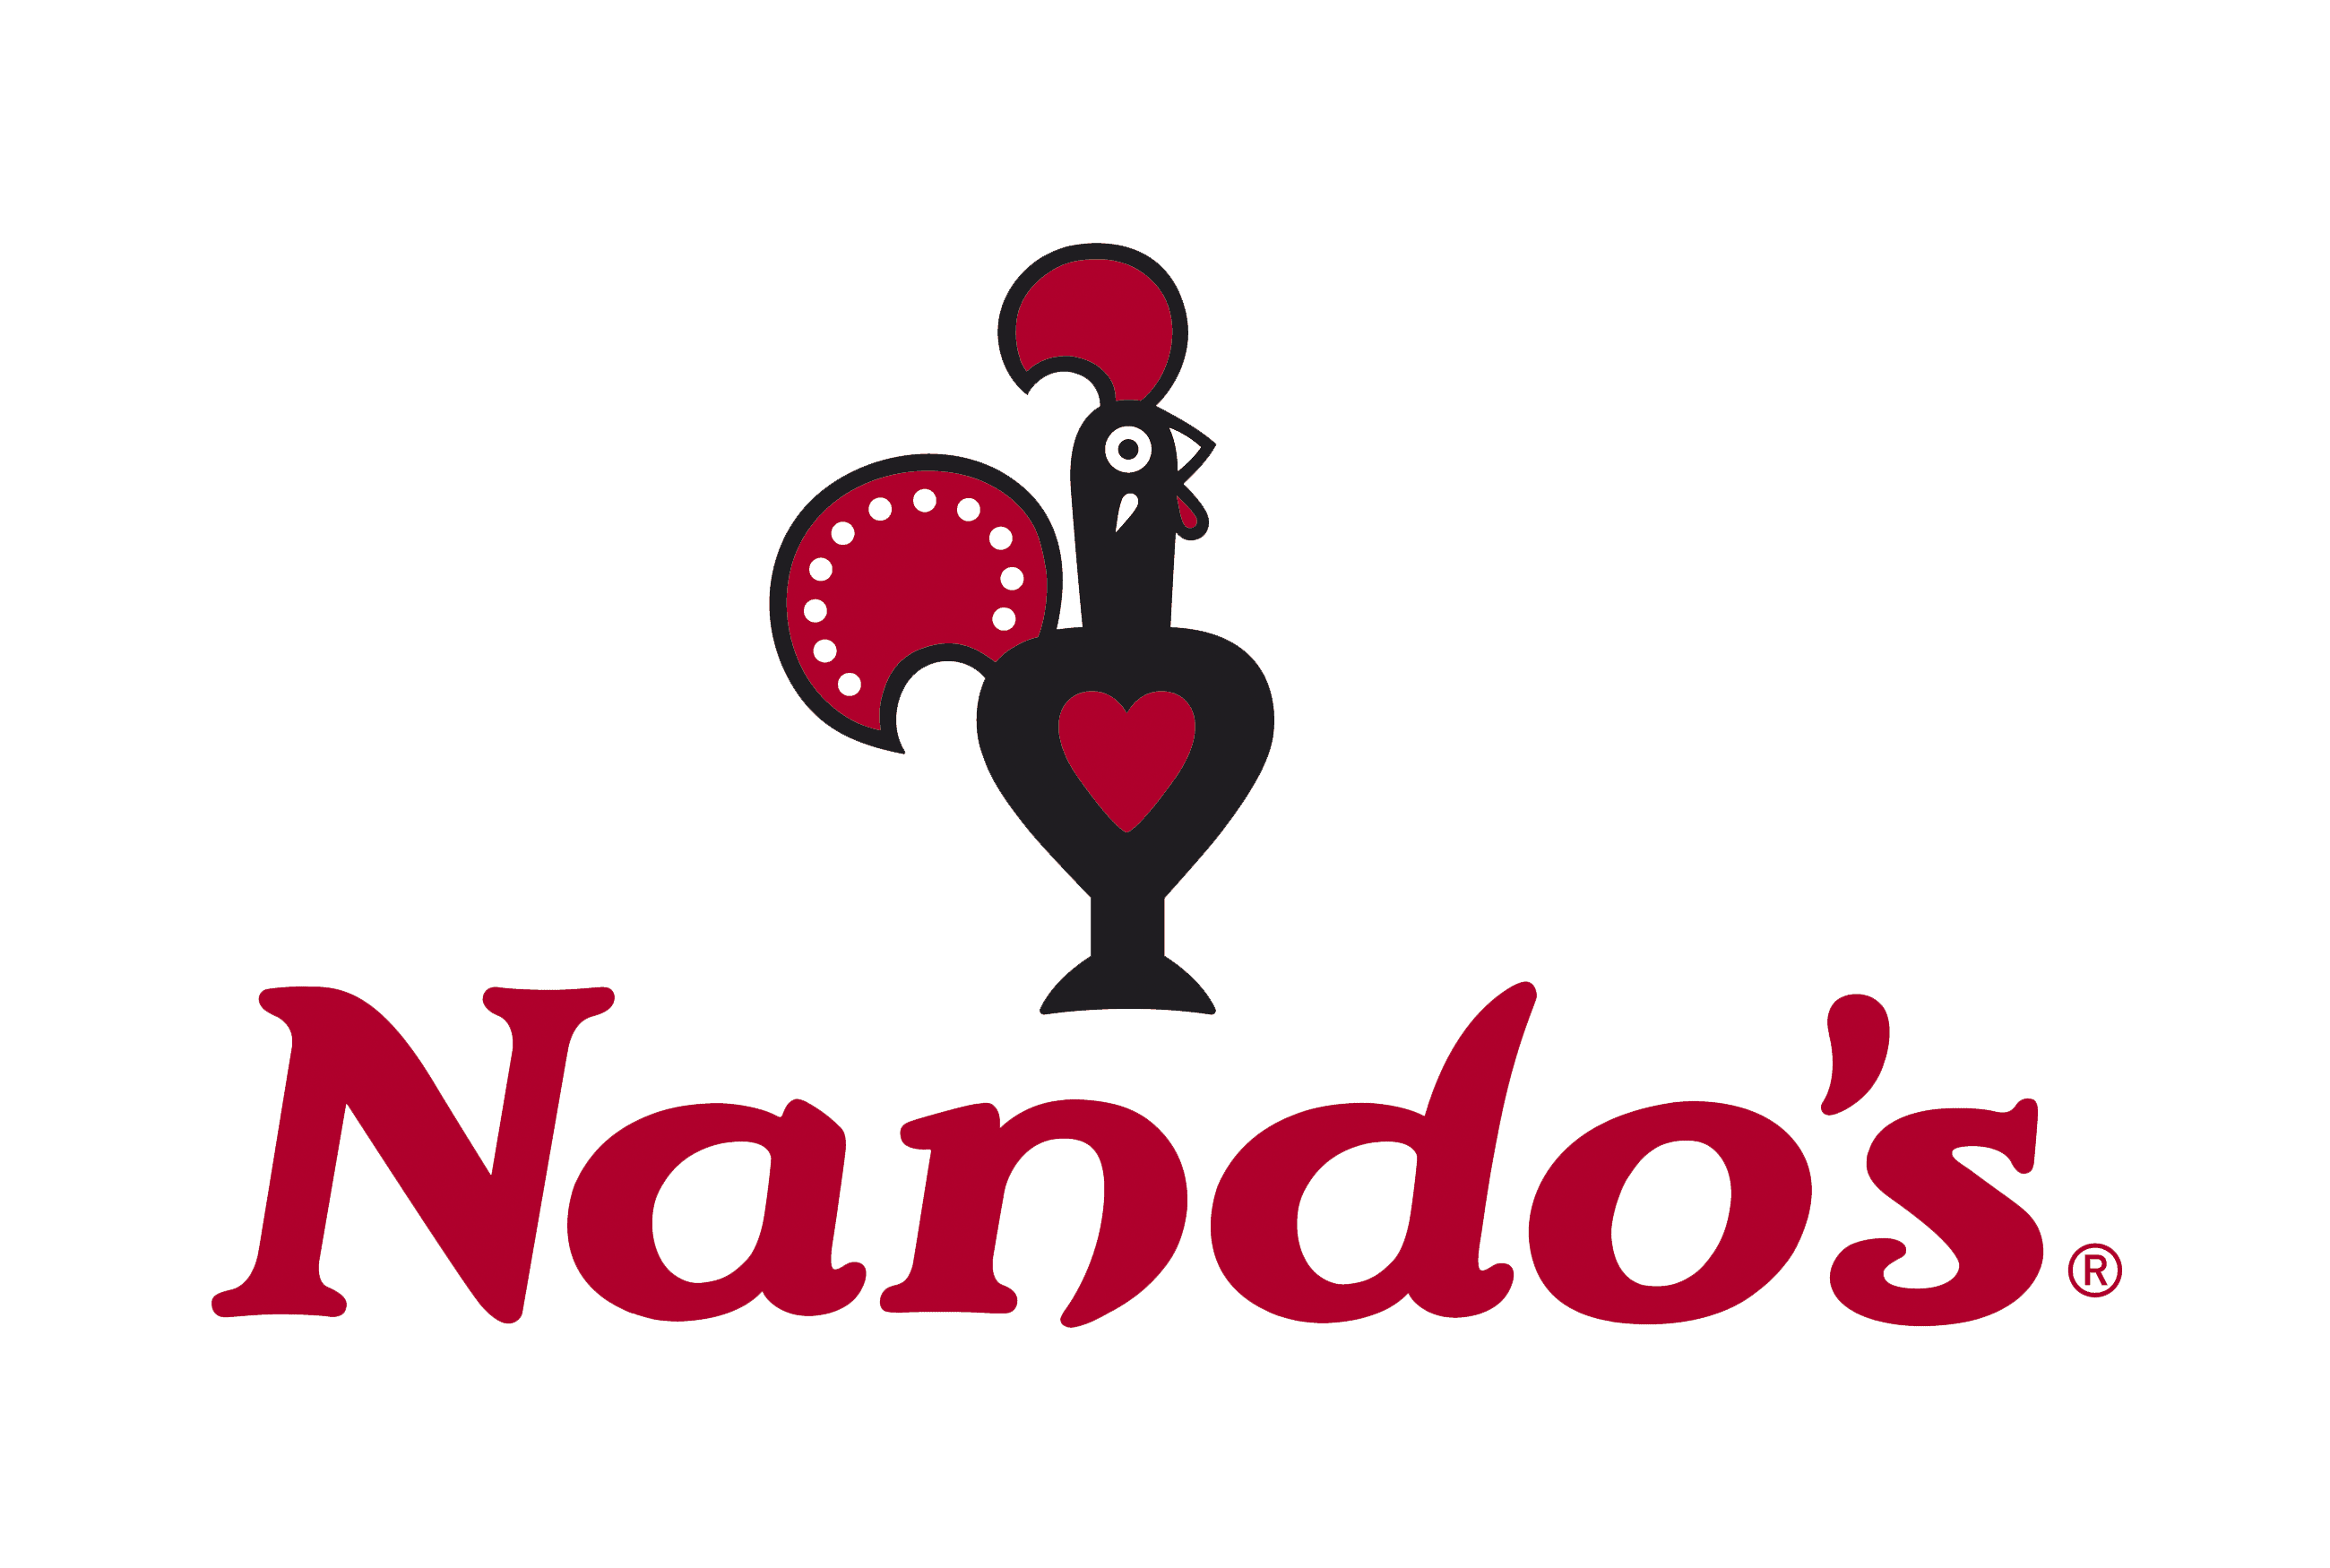 Nando's Offers and Discounts